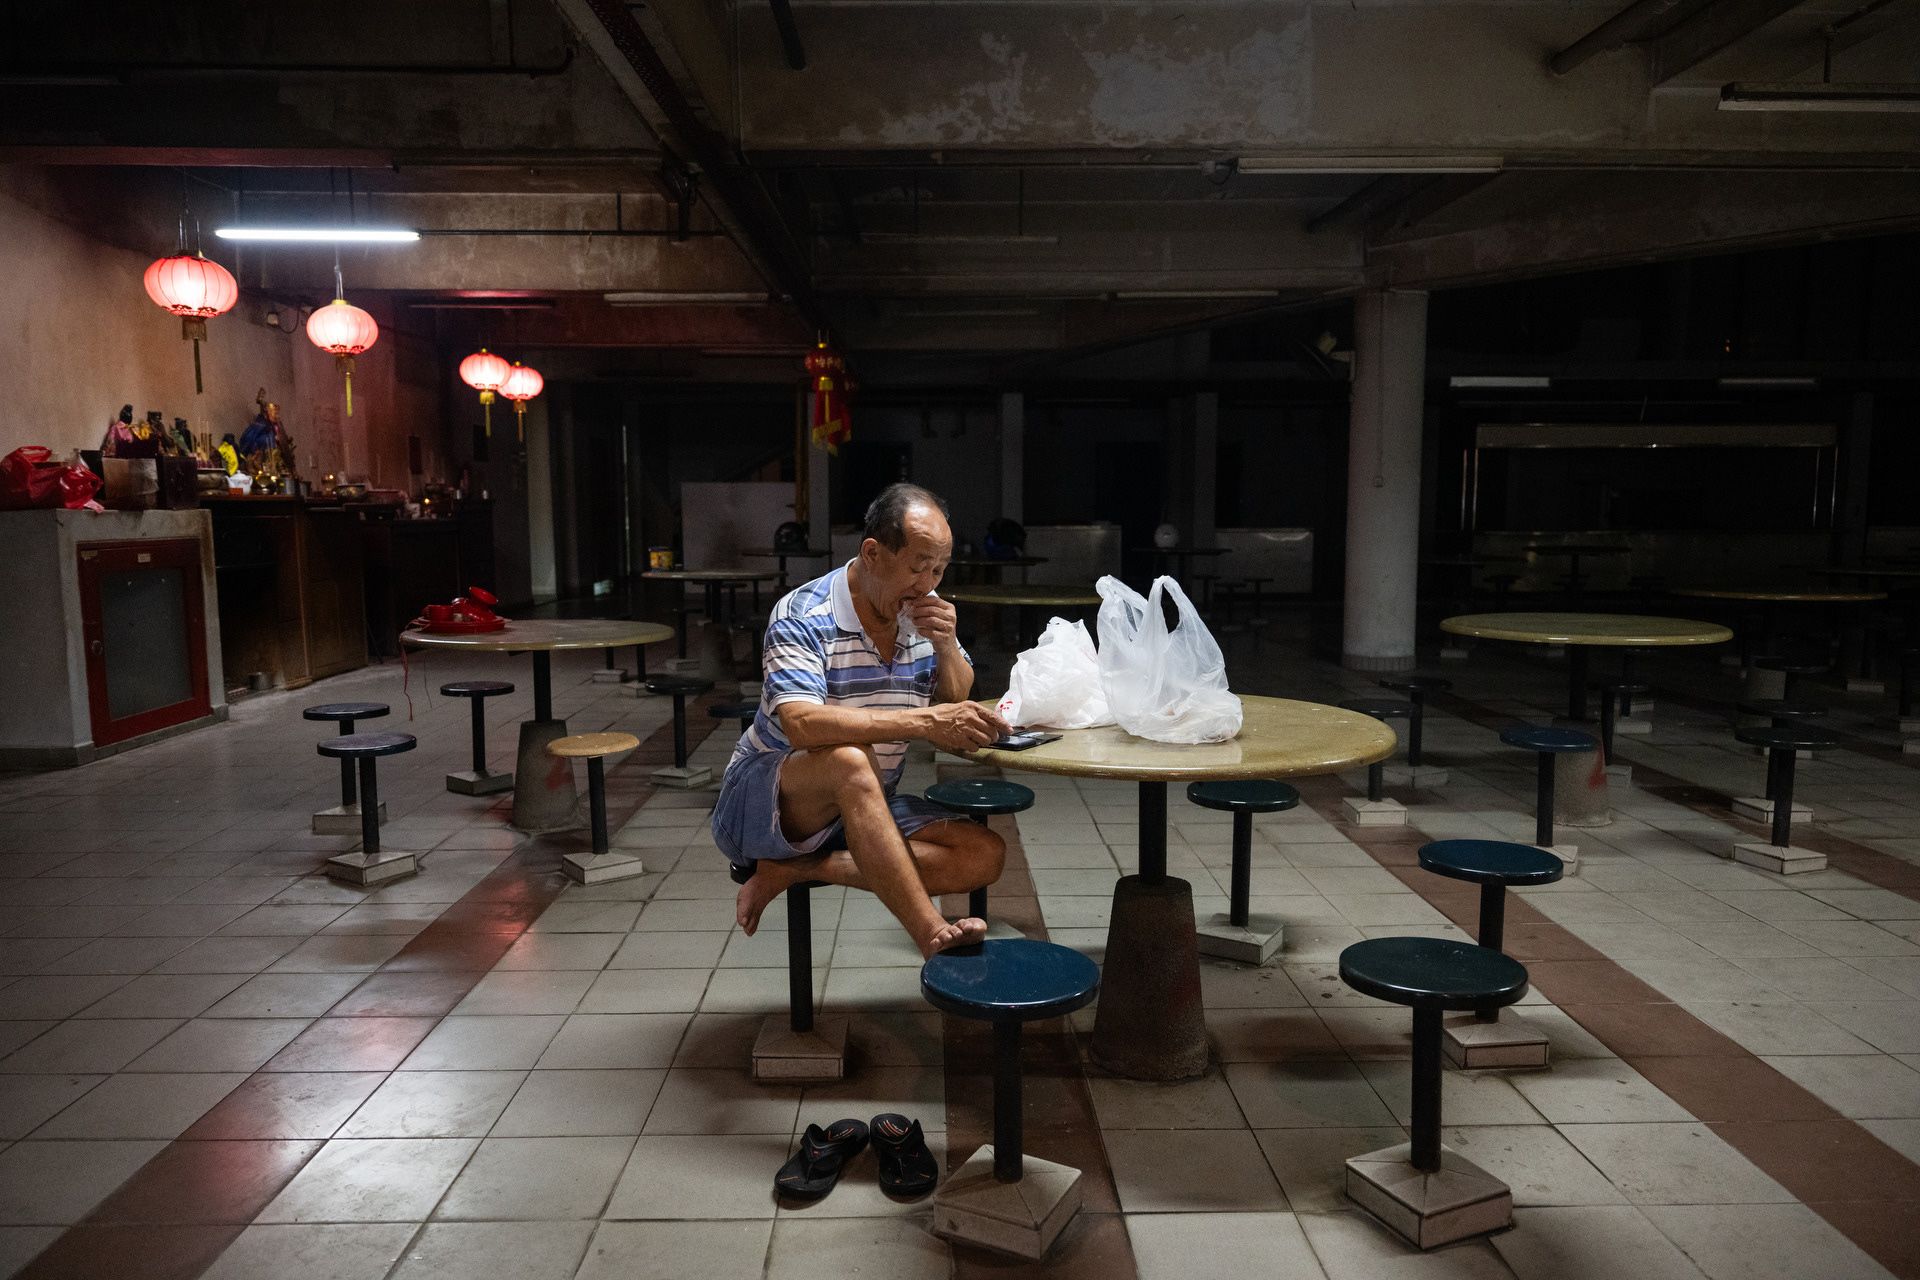 Worker Low Swee Hua, 64, unwinding after the end of a long day at work in the now-defunct canteen, which was closed down as it was not profitable to run.